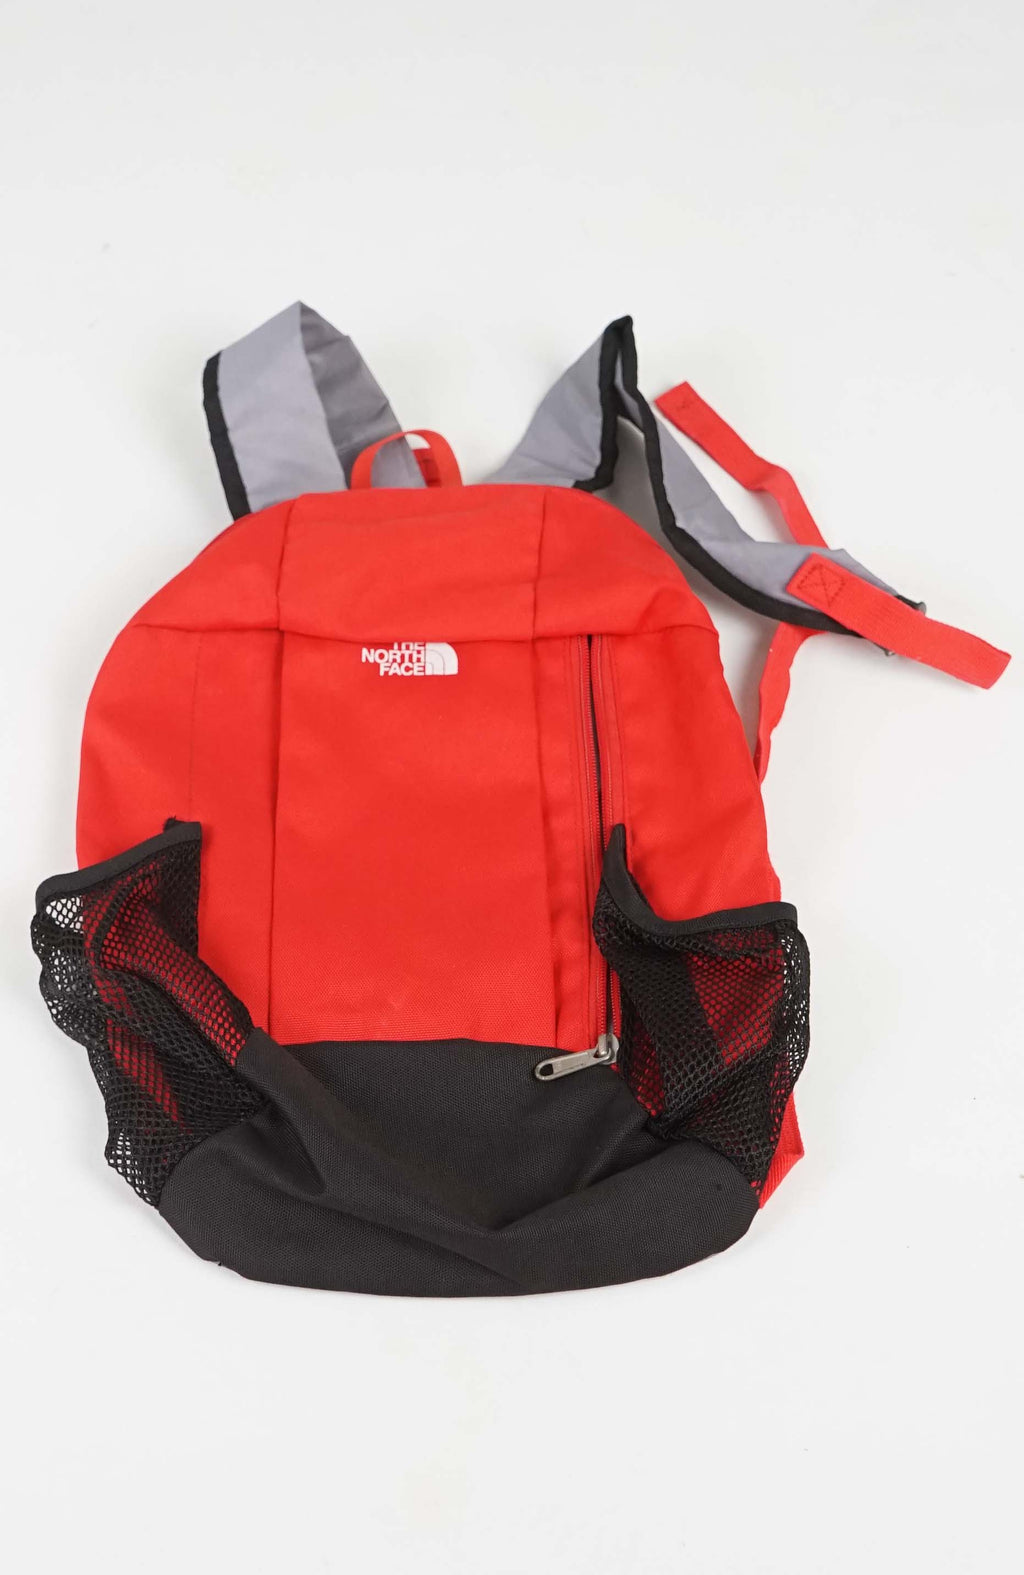 VINTAGE THE NORTH FACE SMALL BACKPACK